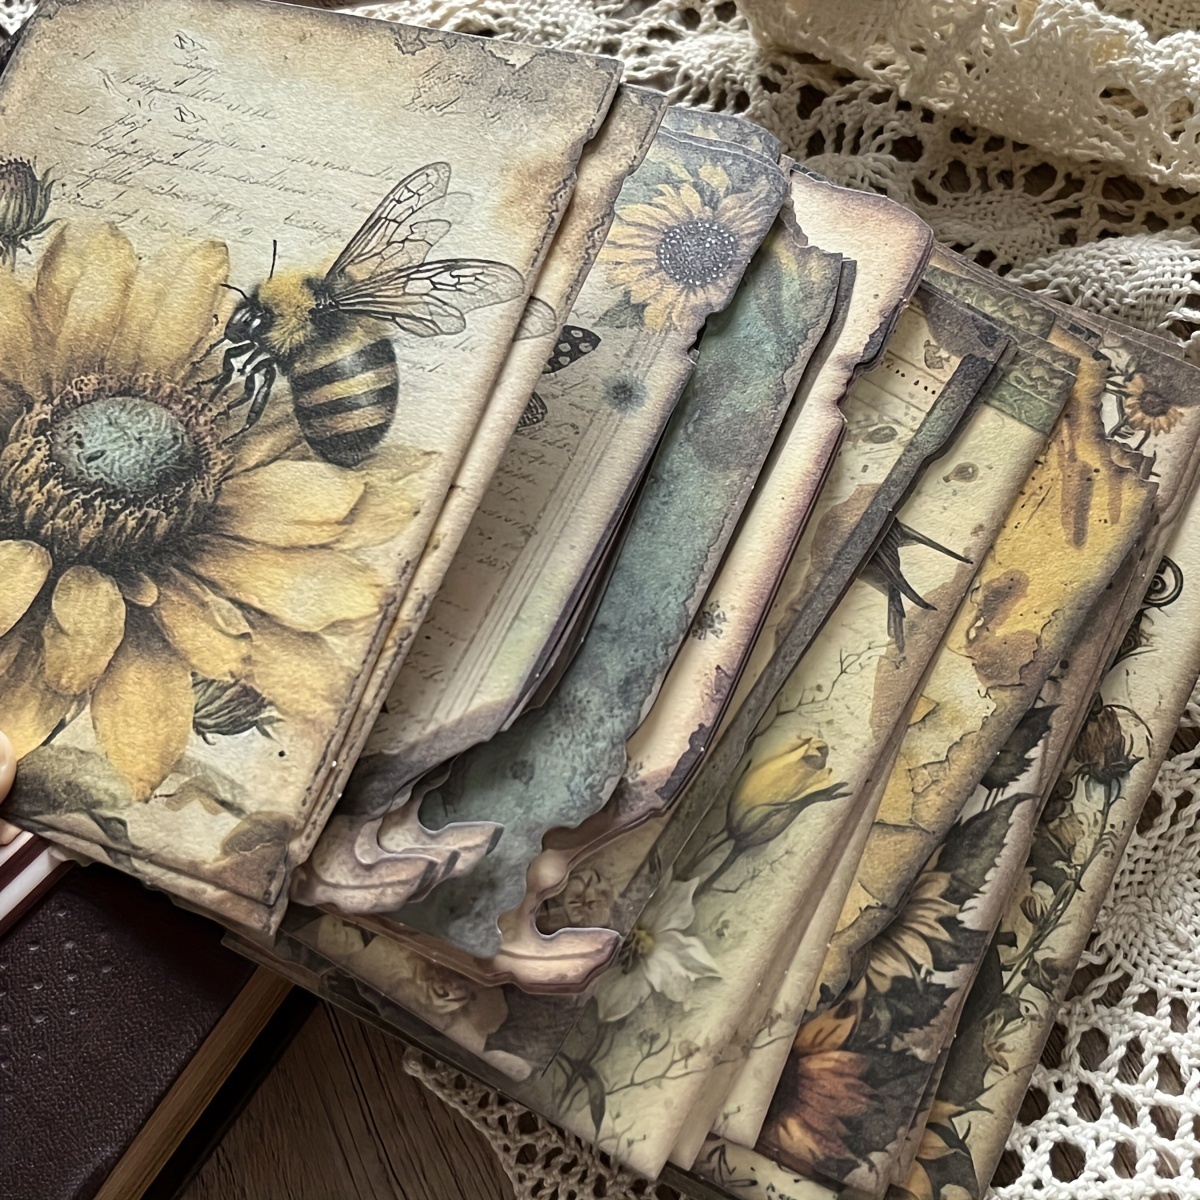 Papercraft - Witchy Journal/junk journal and other junk journals